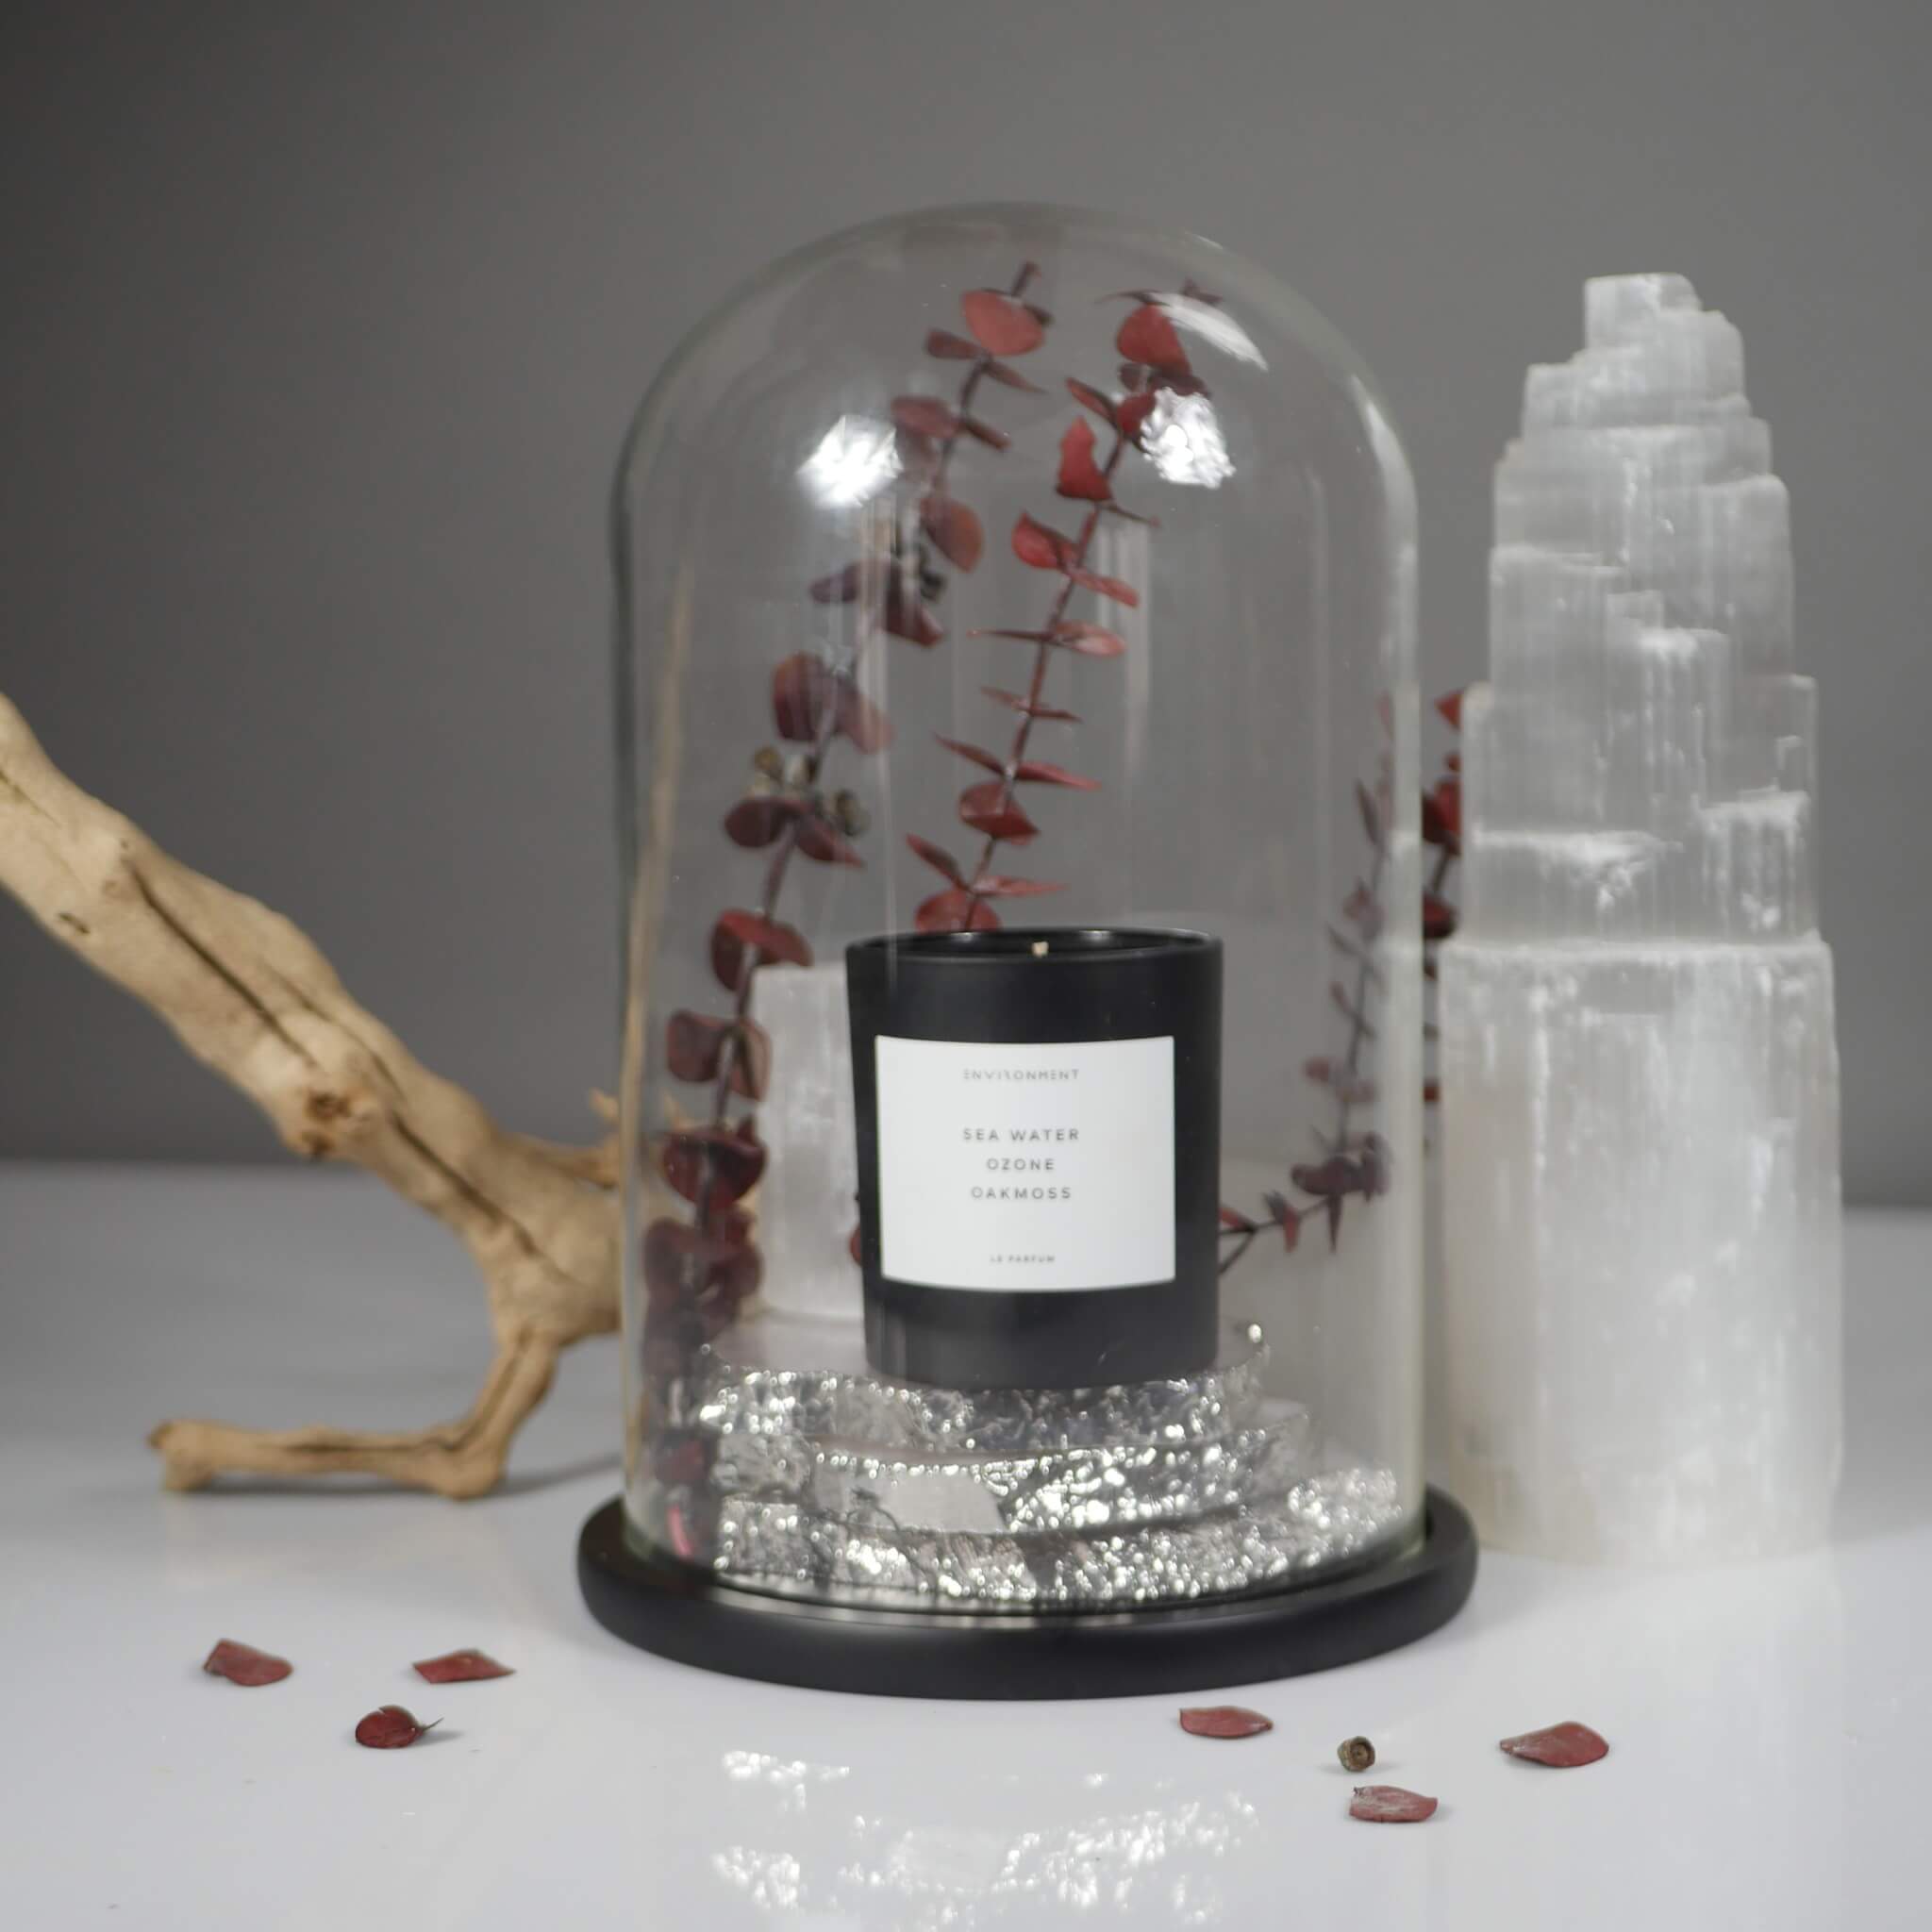 8oz Rosewater | Peony Water | Washed Woods Candle with Lid and Box (Inspired by Issey Miyake L'Eau d'Issey®)